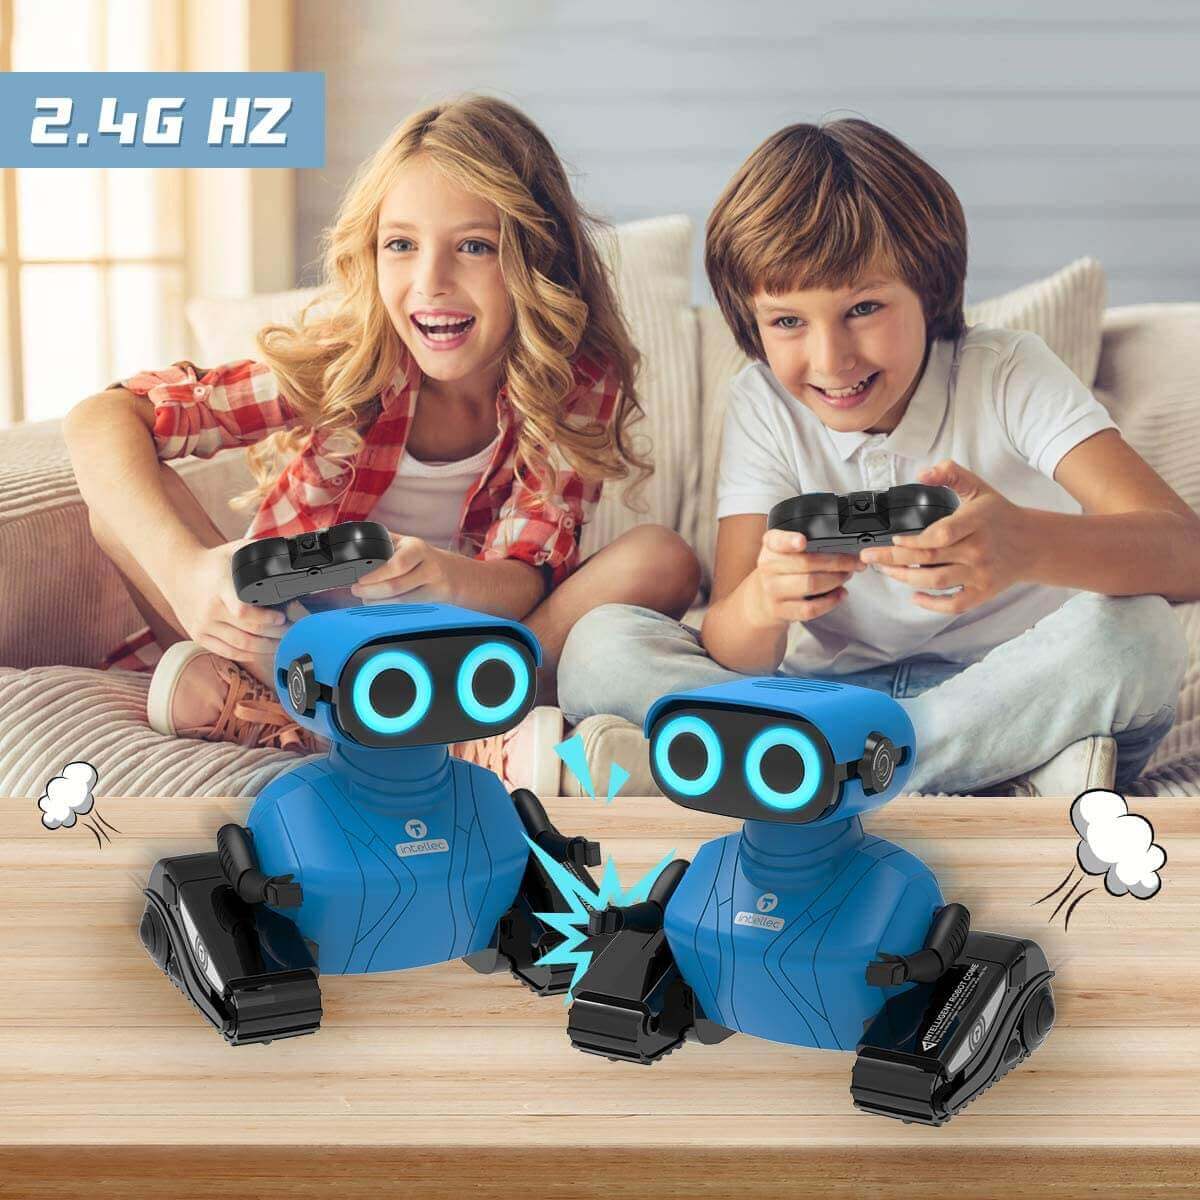 2.4GHz Remote Control Robot With LED Eyes Dance and Sounds Smart Toys For Kids